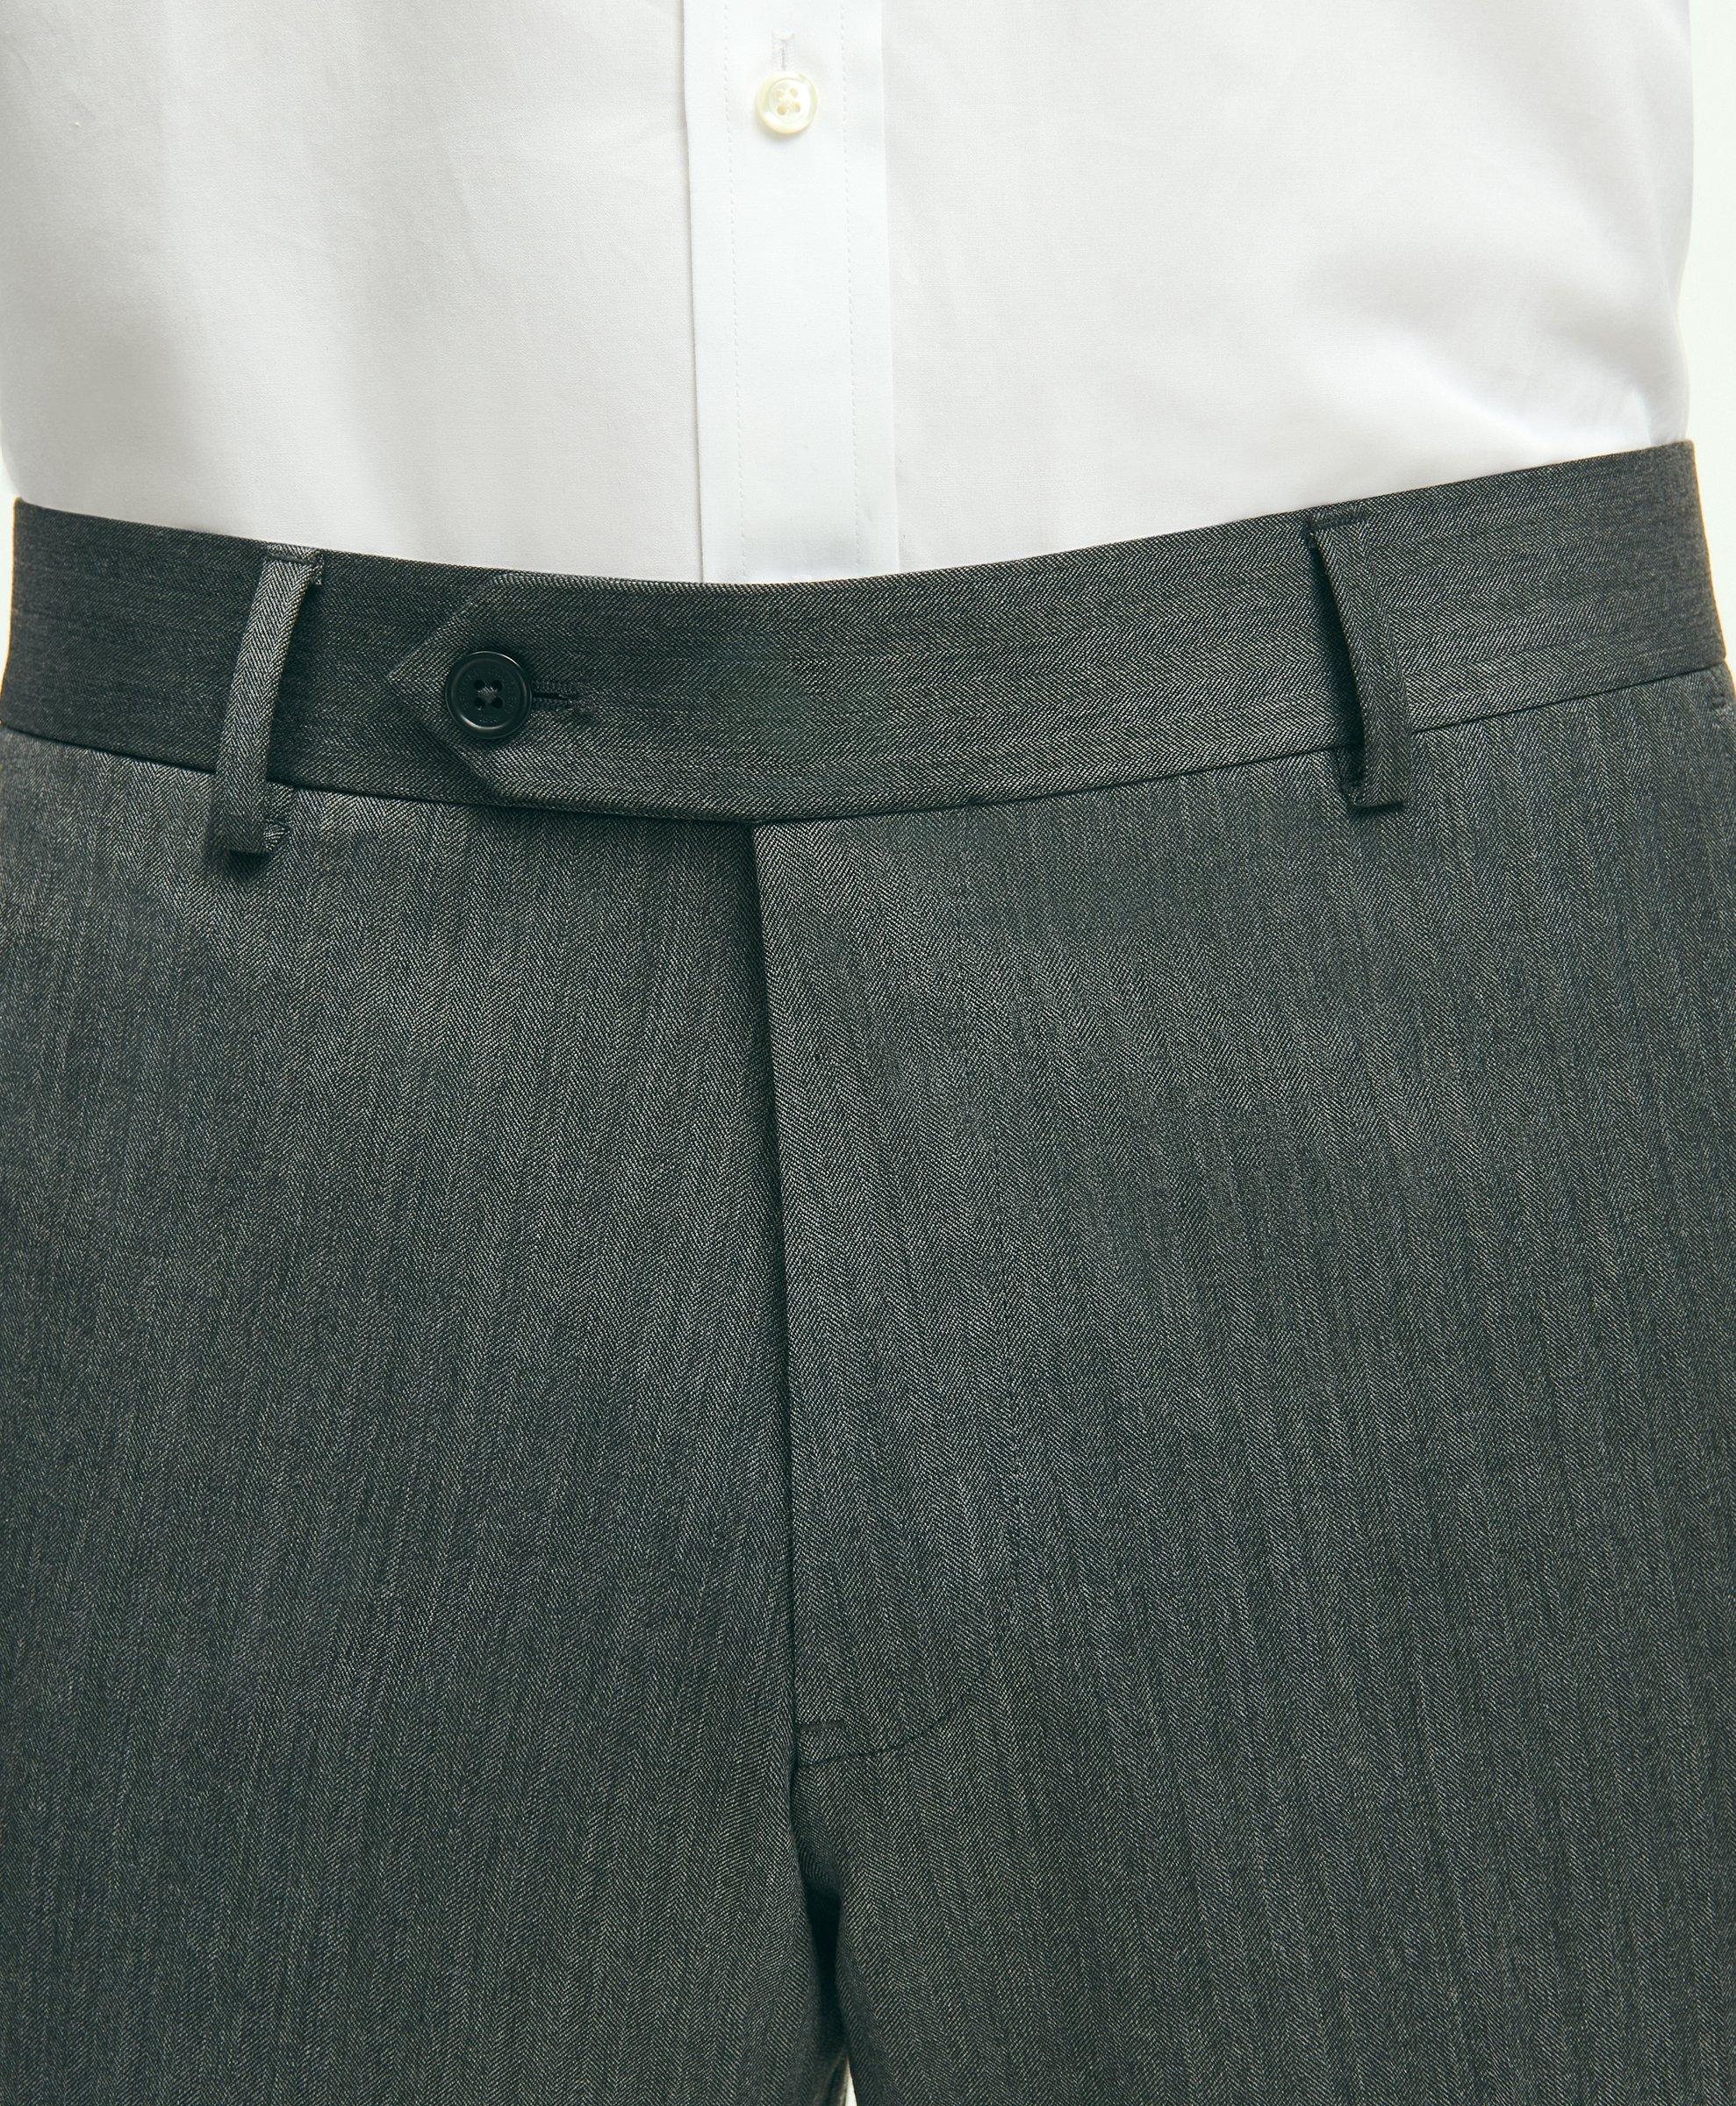 Brooks Brothers Madison Fit Plain Front Cotton Dress Trousers